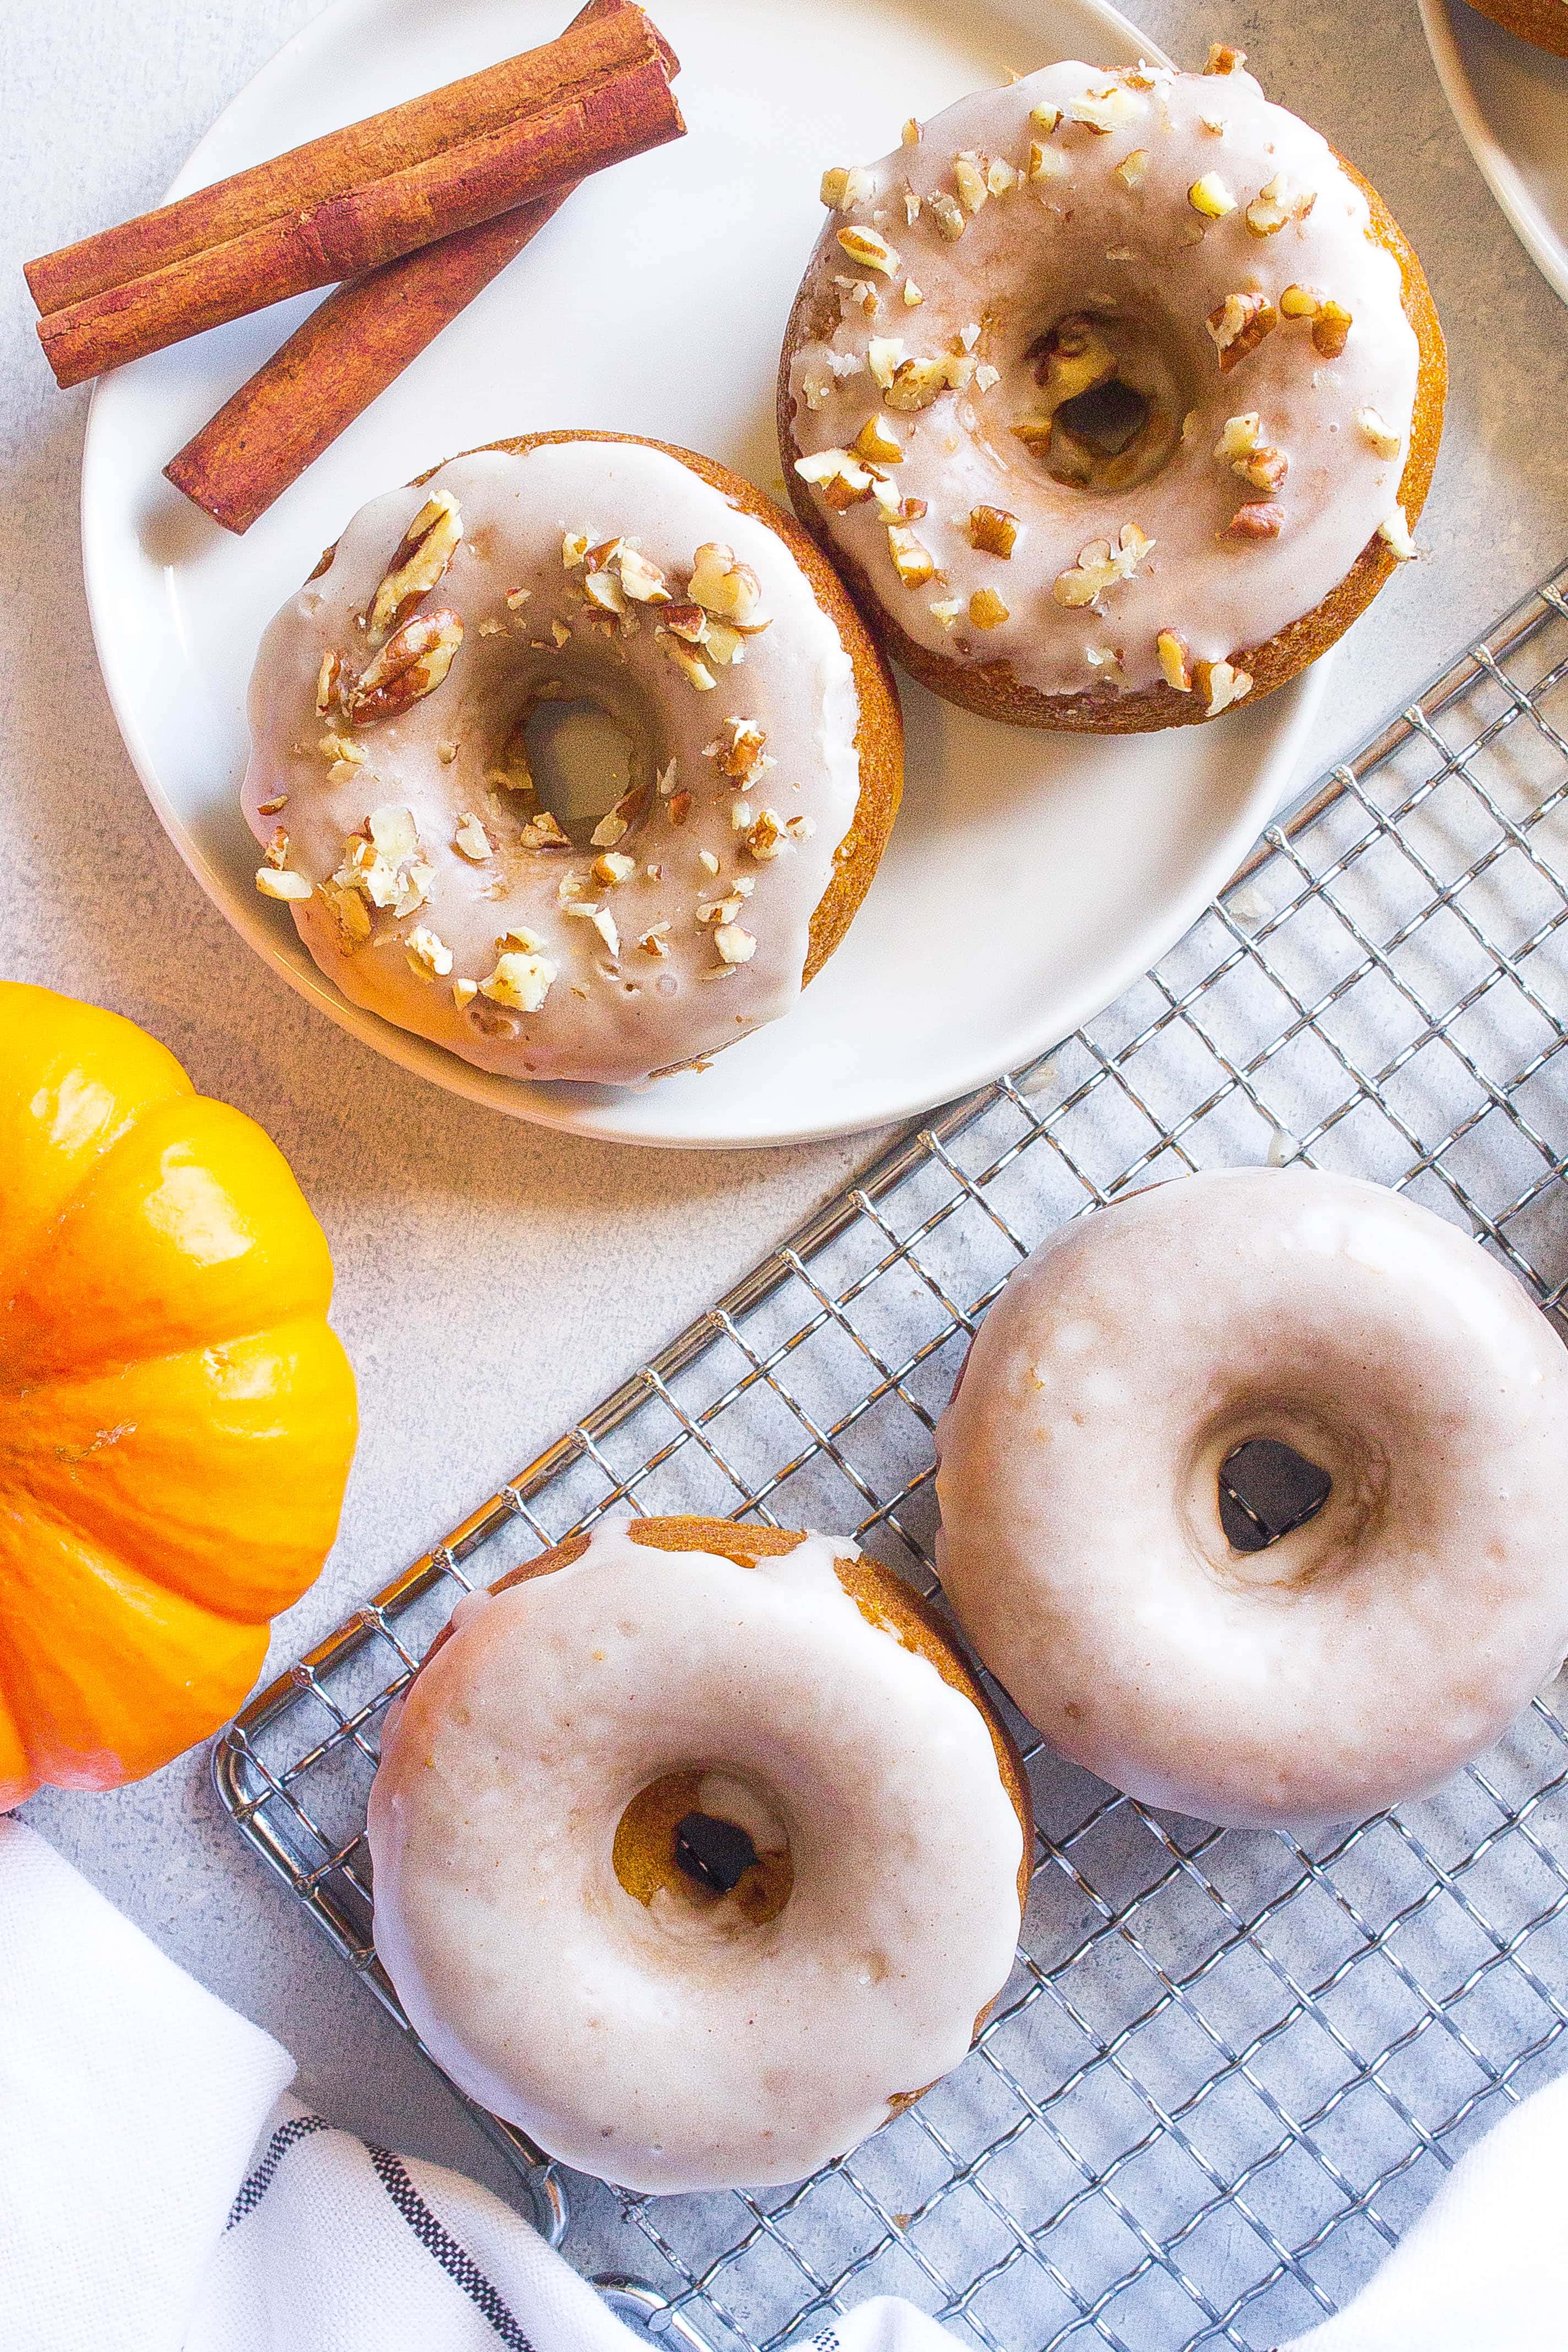 Baked Pumpkin Spice Donuts